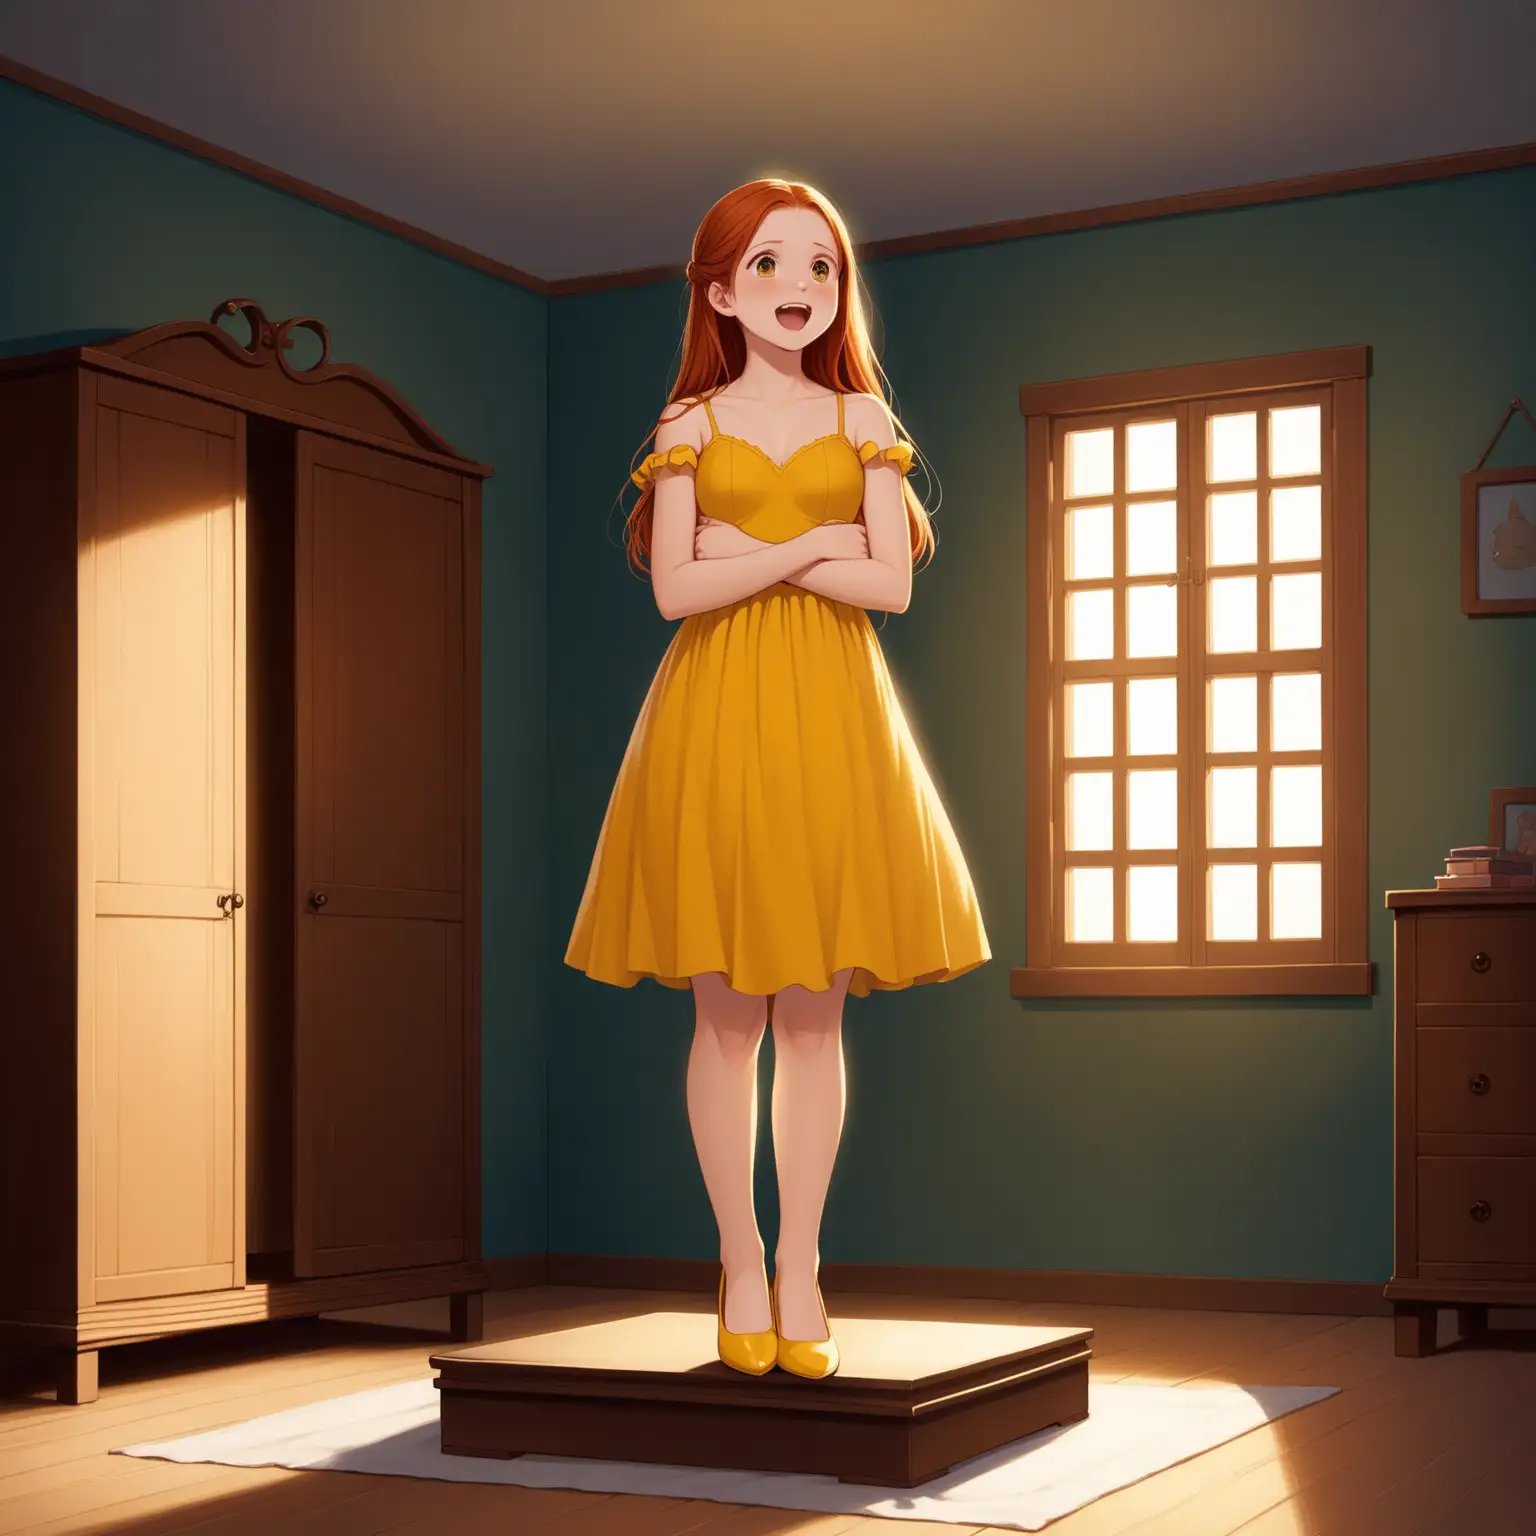 Enchanted Bedroom Portrait Young Ginny Weasley in Beauty and the Beast Attire